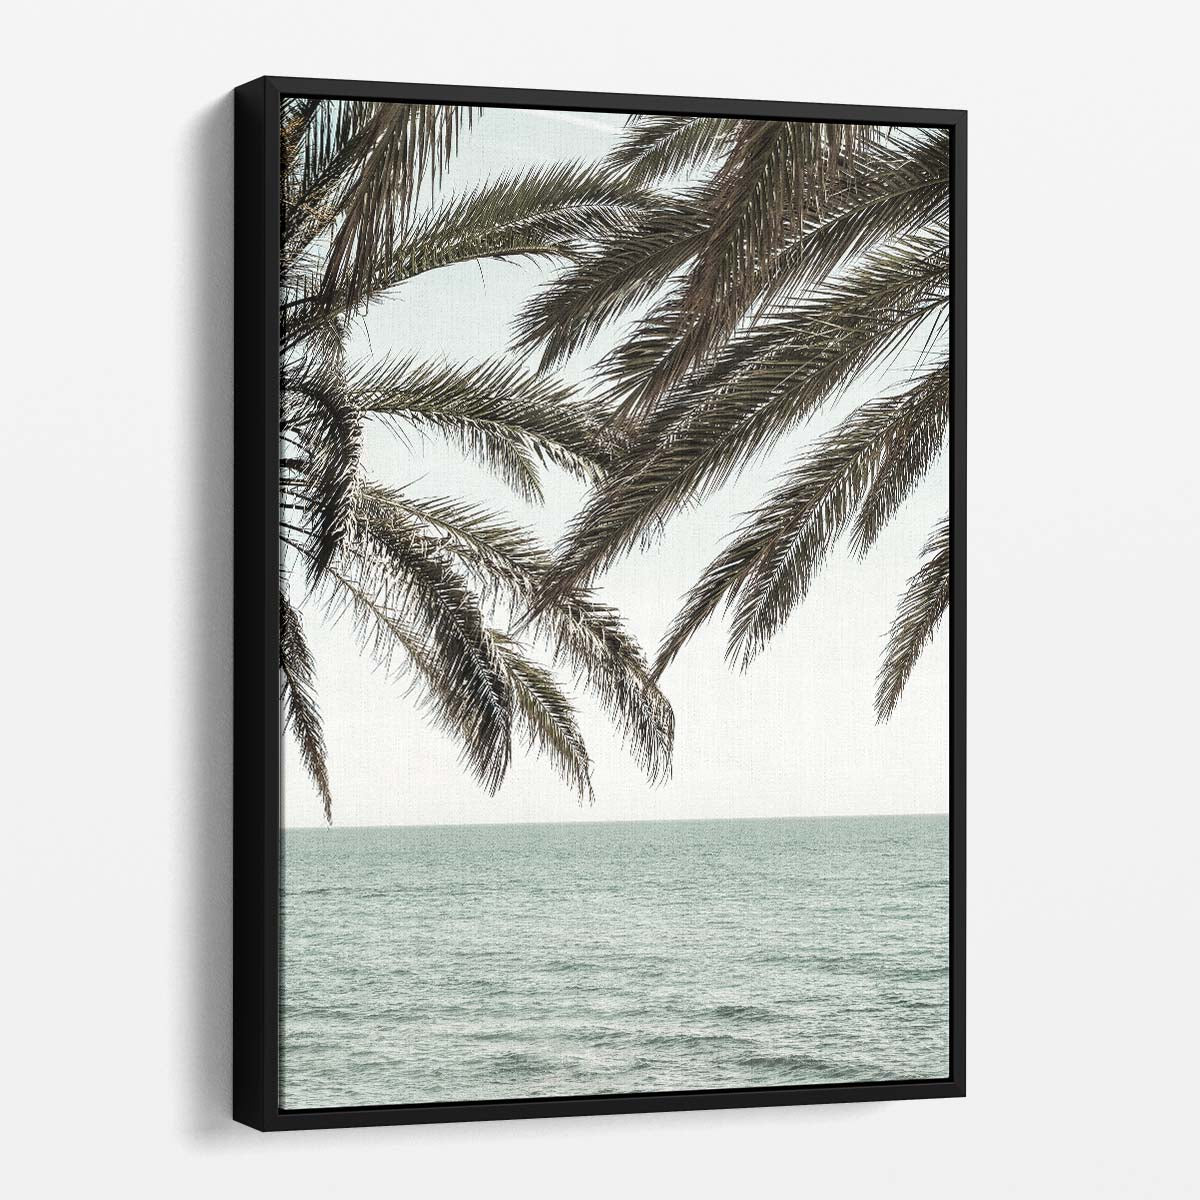 Exotic Tropical Palm Tree Beach Landscape Photography Art by Luxuriance Designs, made in USA